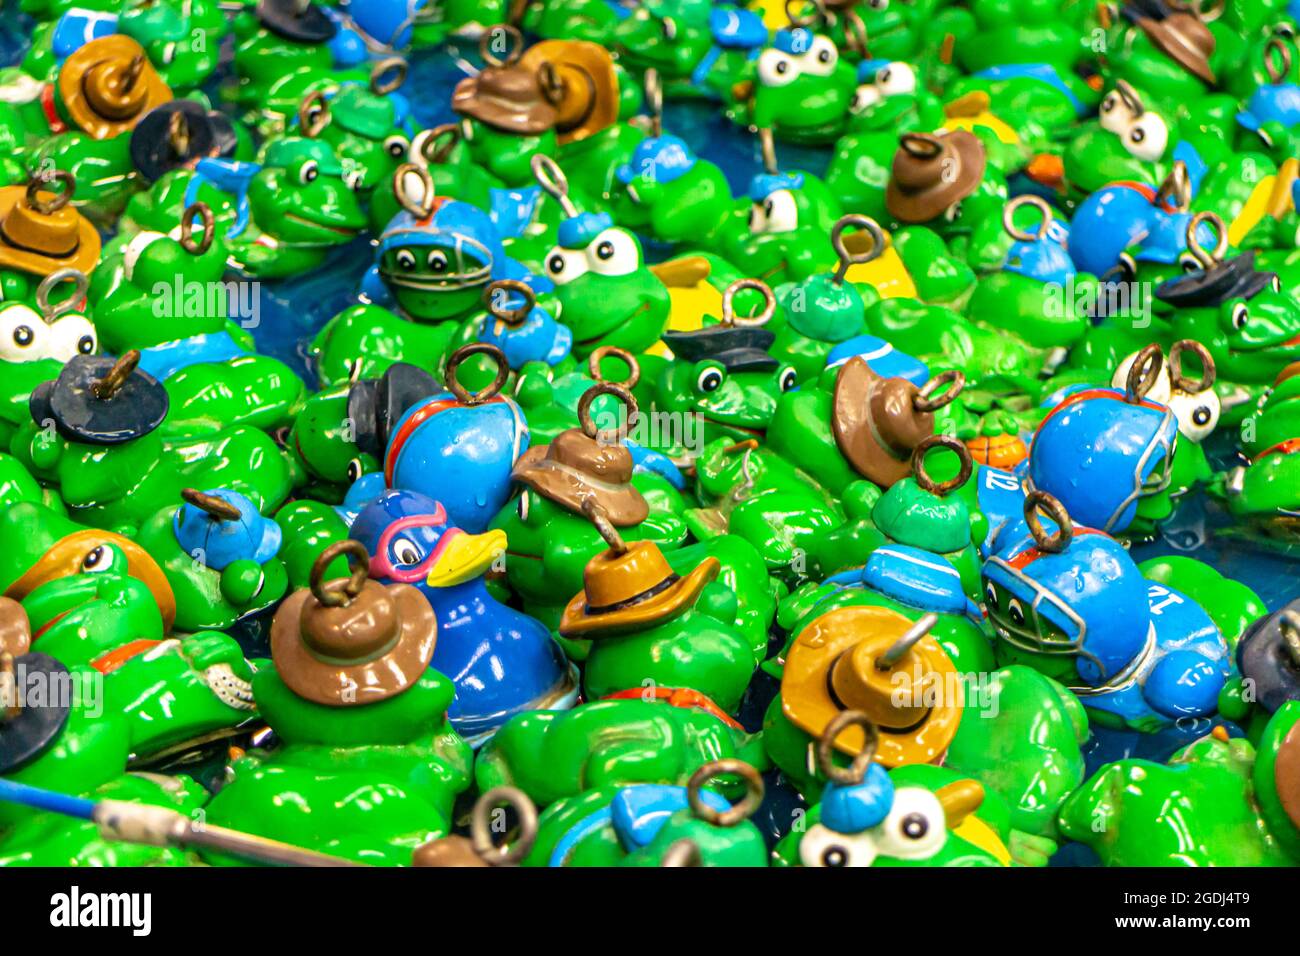 https://c8.alamy.com/comp/2GDJ4T9/childrens-game-duck-fishing-at-a-fair-lots-of-green-and-blue-plastic-frogs-and-plastic-ducks-in-a-pool-of-water-with-a-ring-for-fishing-on-their-hea-2GDJ4T9.jpg